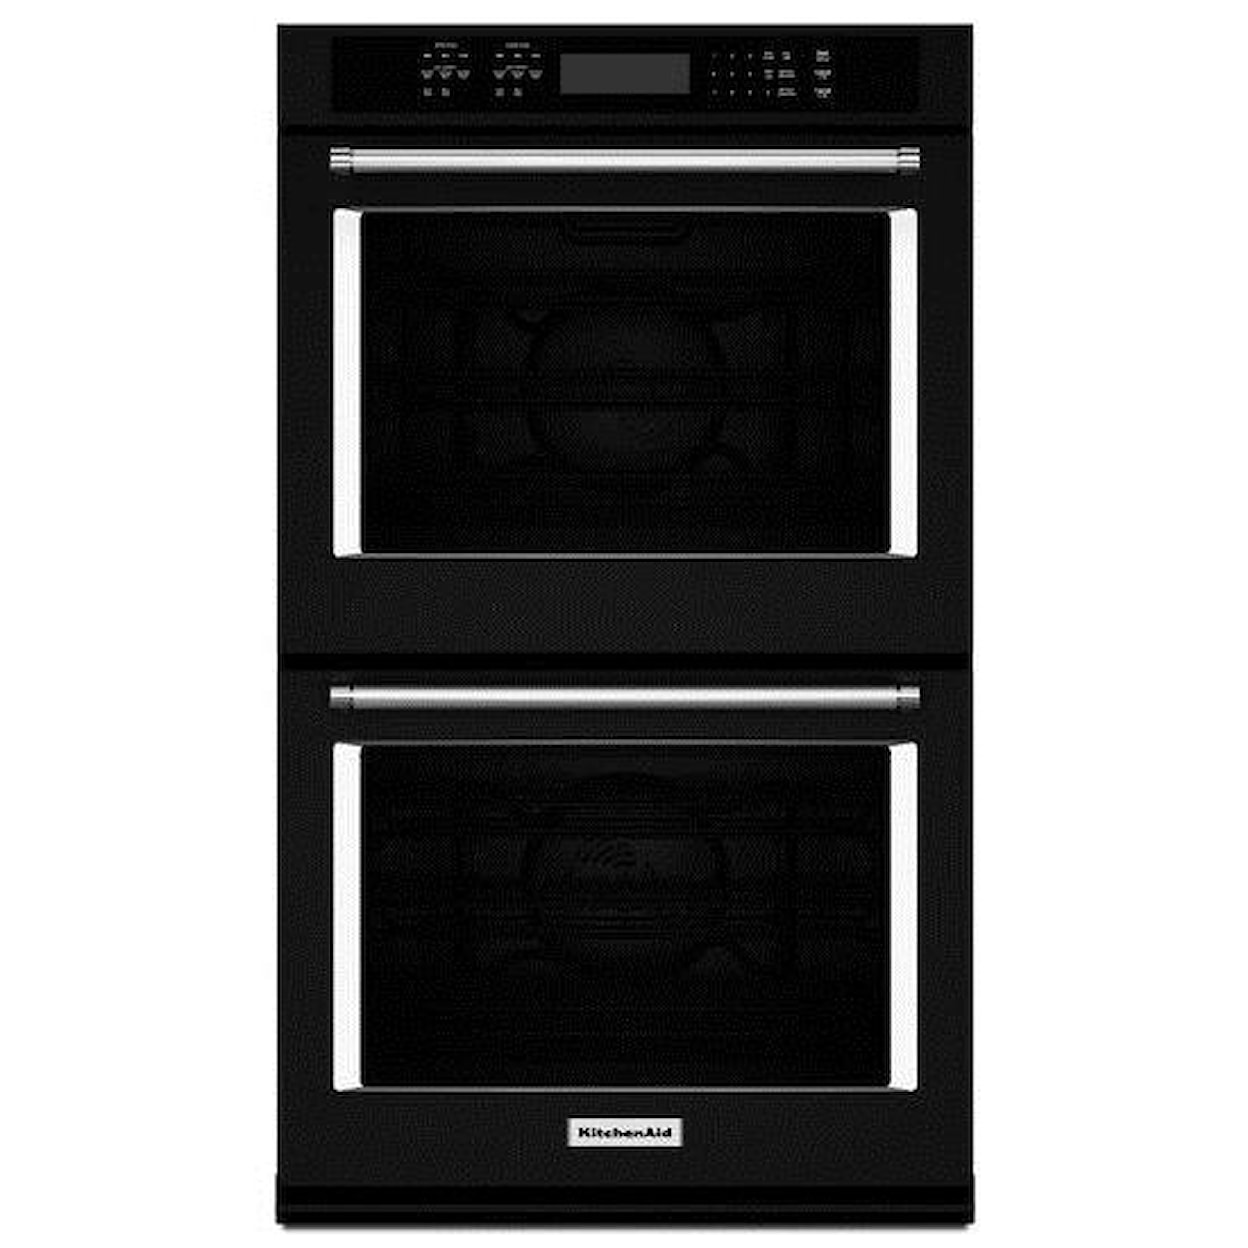 KitchenAid Built-In Electric Double Ovens 8.6 Cu. Ft. 27" Double Wall Oven